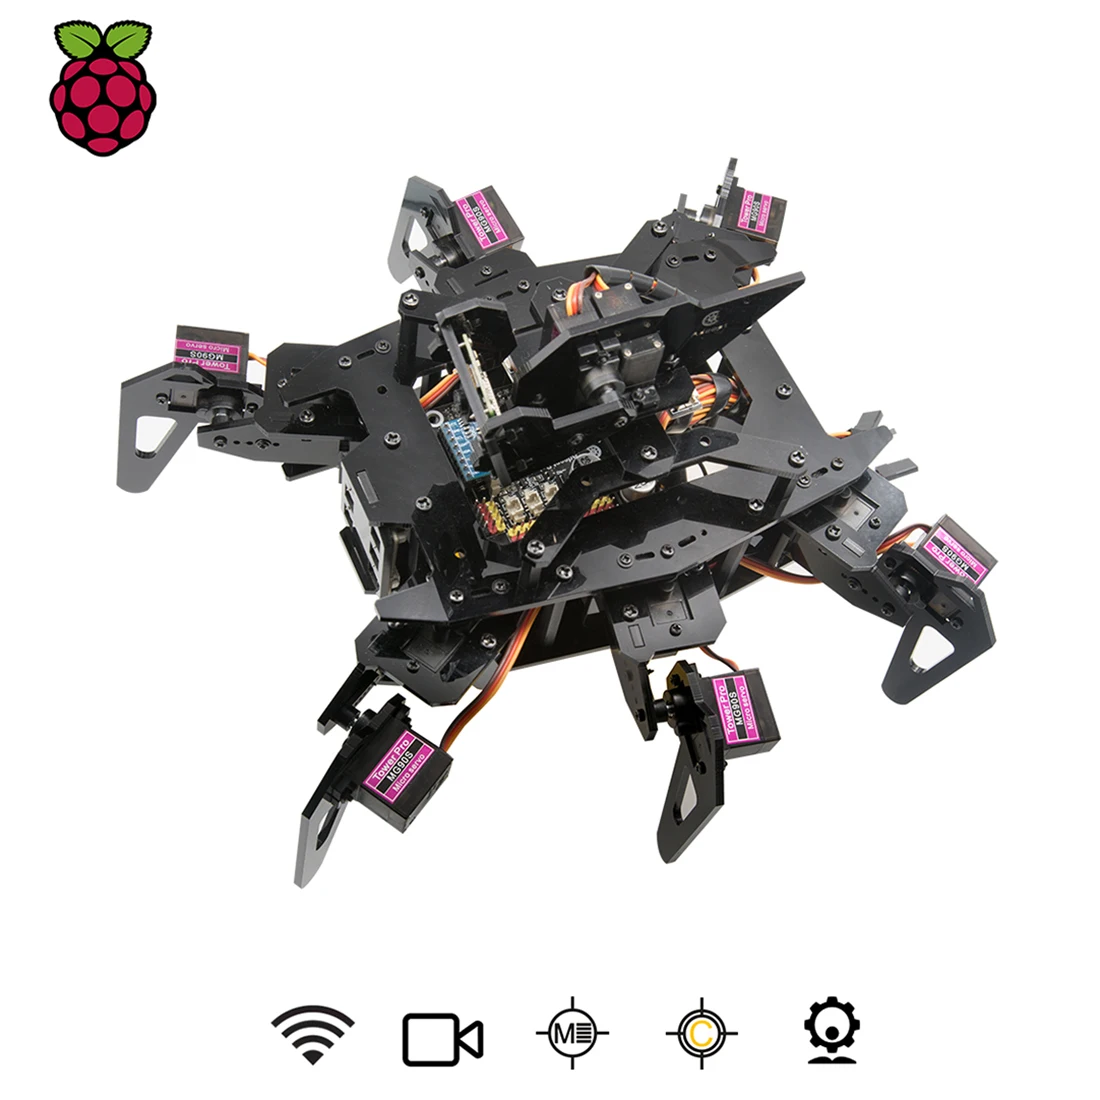 Adeept RaspClaws Hexapod Spider Robot Kit with OpenCV Target Tracking Video Transmission Crawling Robot for Raspberry Pi 3